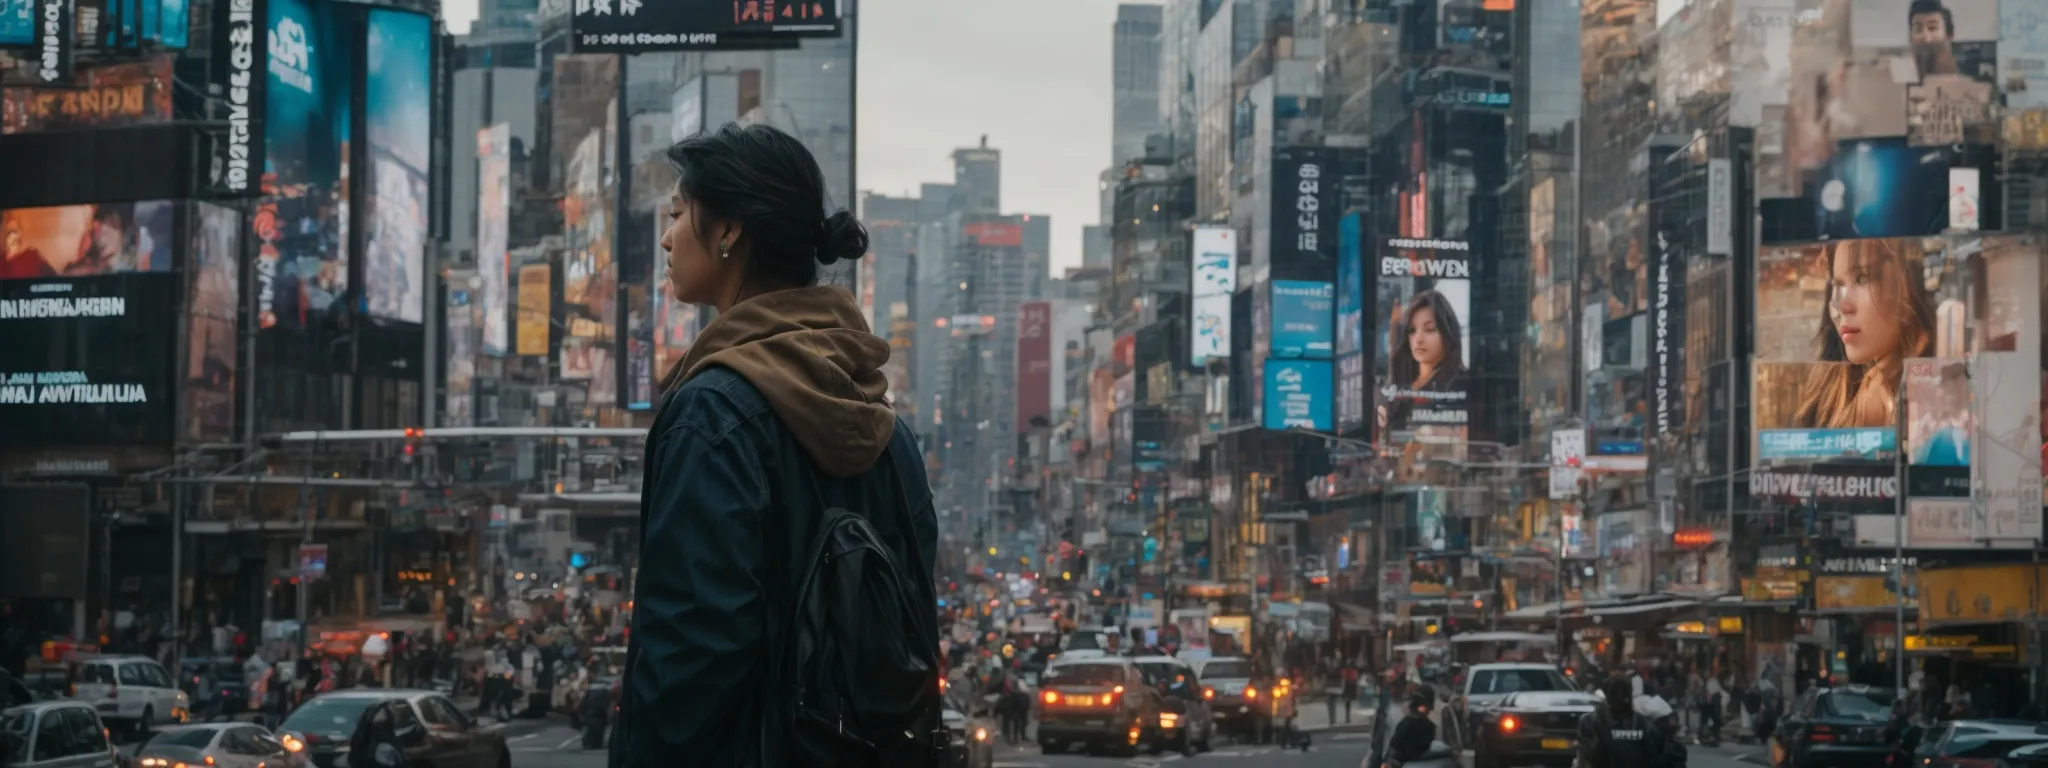 a person stands on a crowded street corner, gazing at a series of billboards displaying trending hashtag topics against a bustling city backdrop.